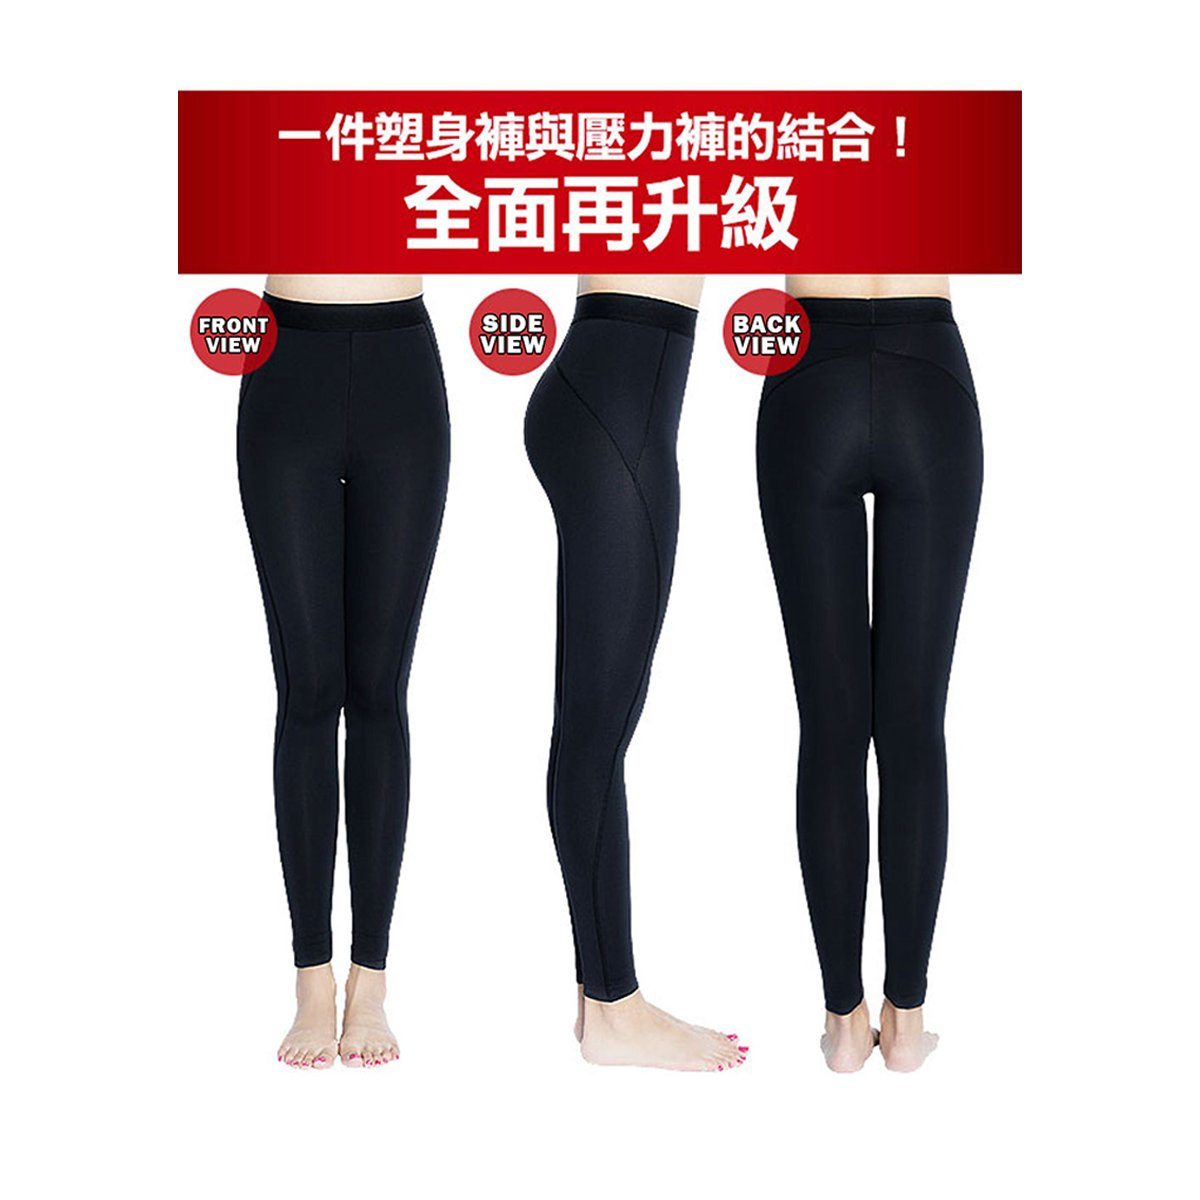 ($14.90 Only) Eheart Slim Shaping Waist Support Leggings - Bloom Concept